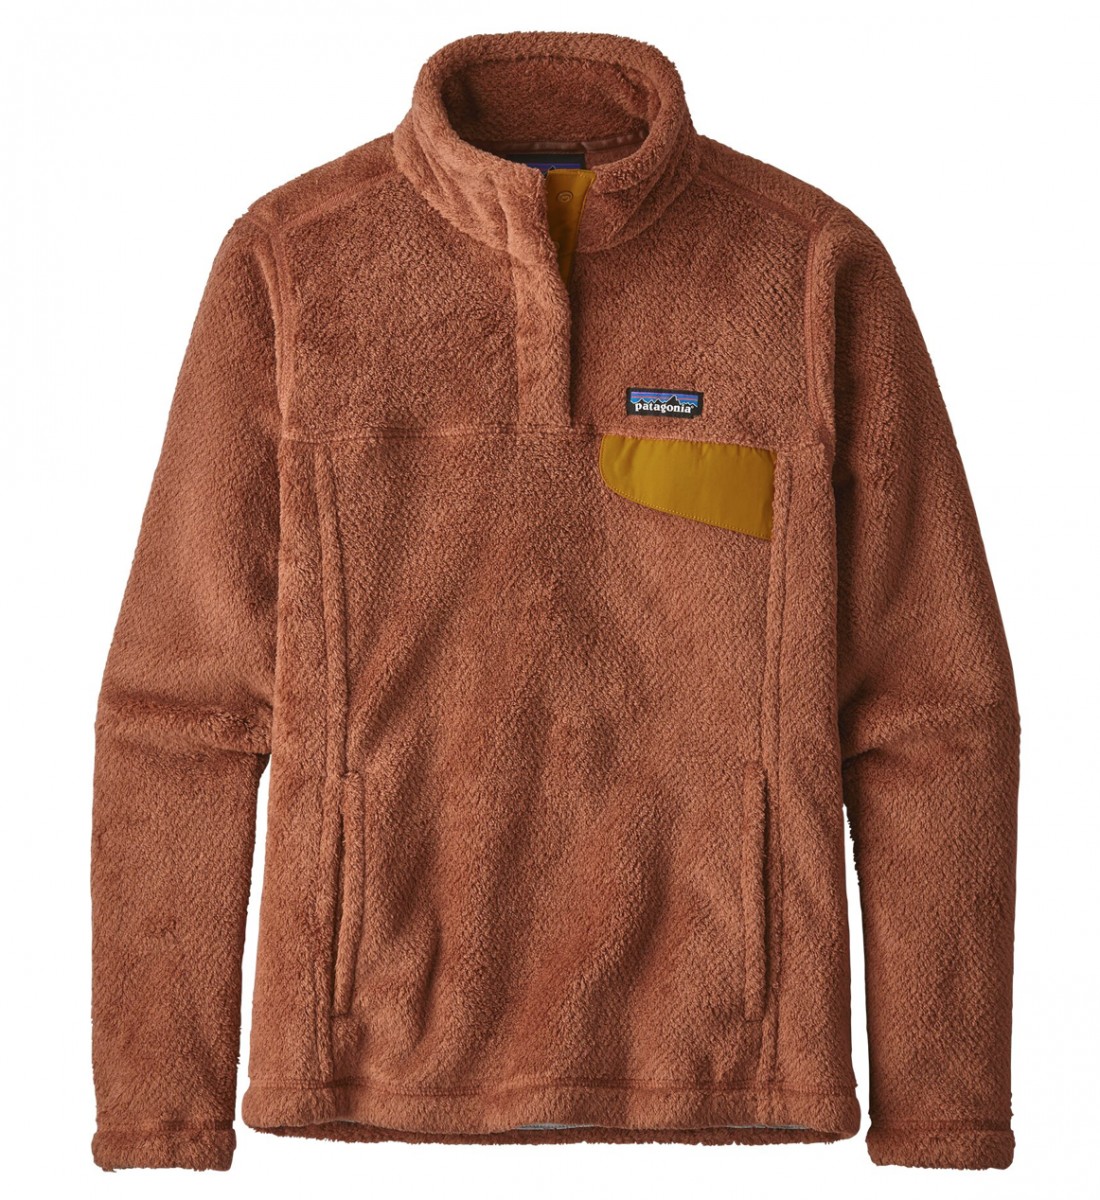 Patagonia Re-Tool Snap-T Pullover - Women's Review